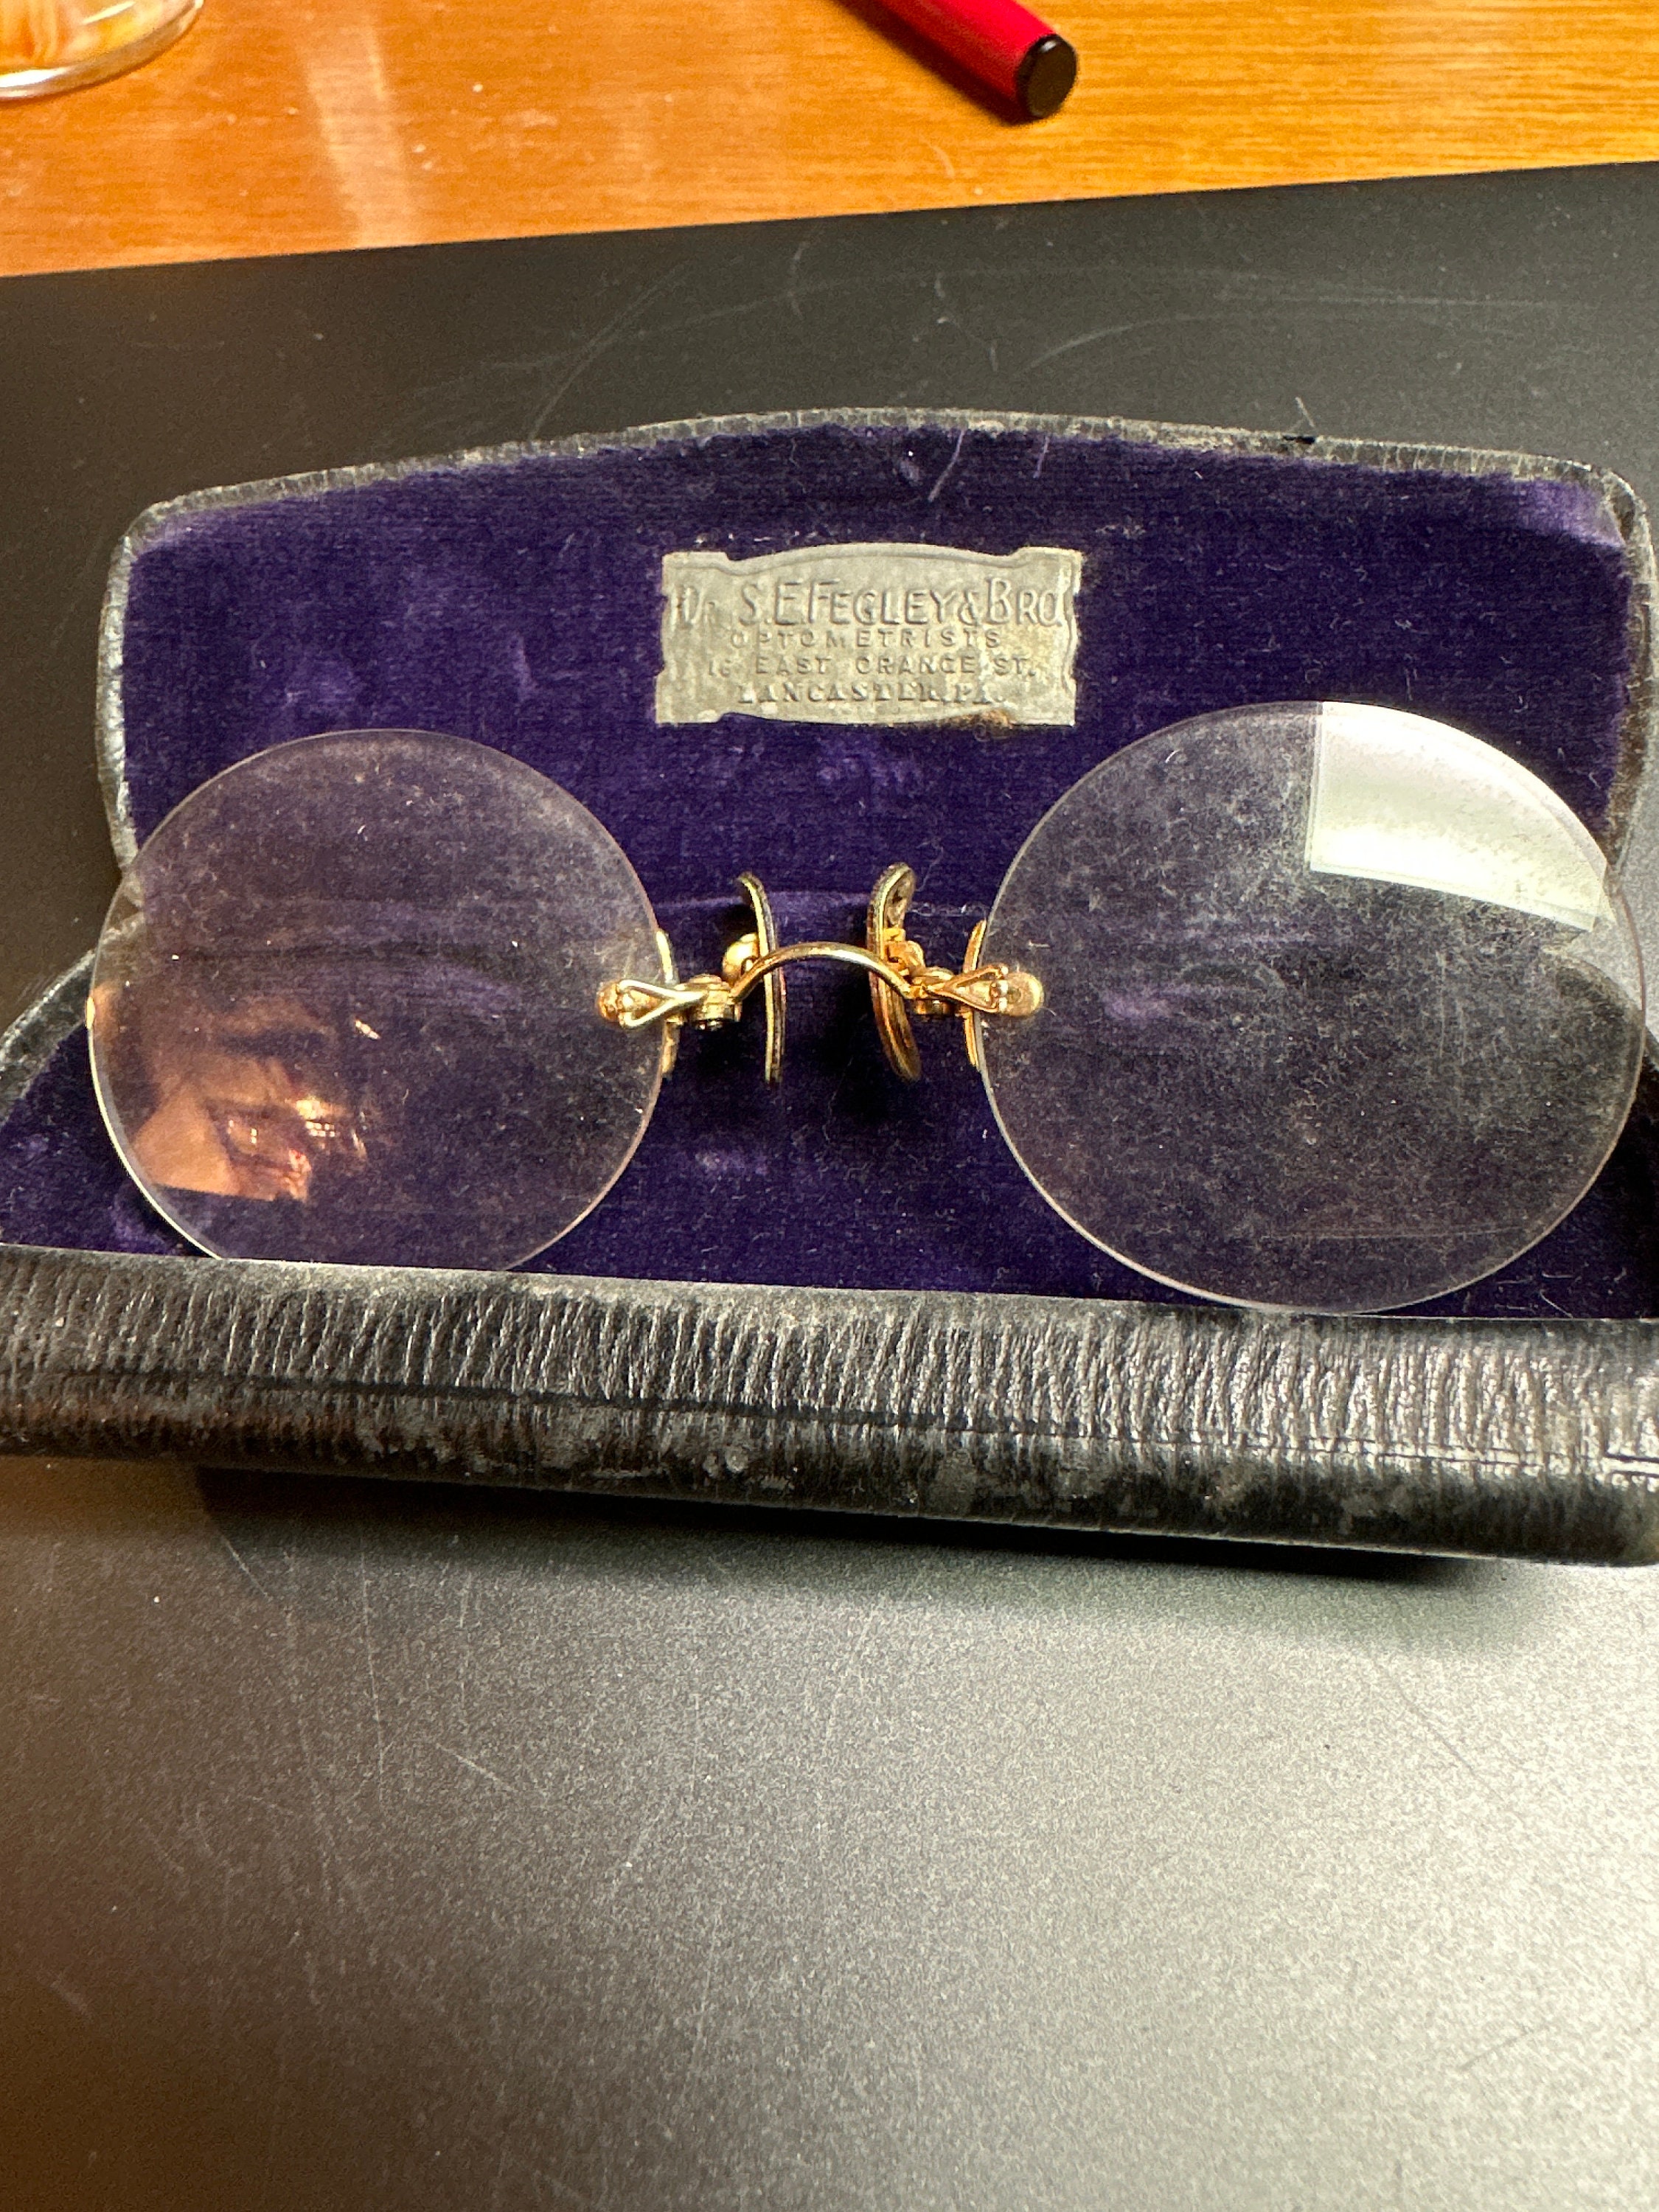 Antique Ladies Pince Nez Eyeglasses with Hairpin, Hair Accessory